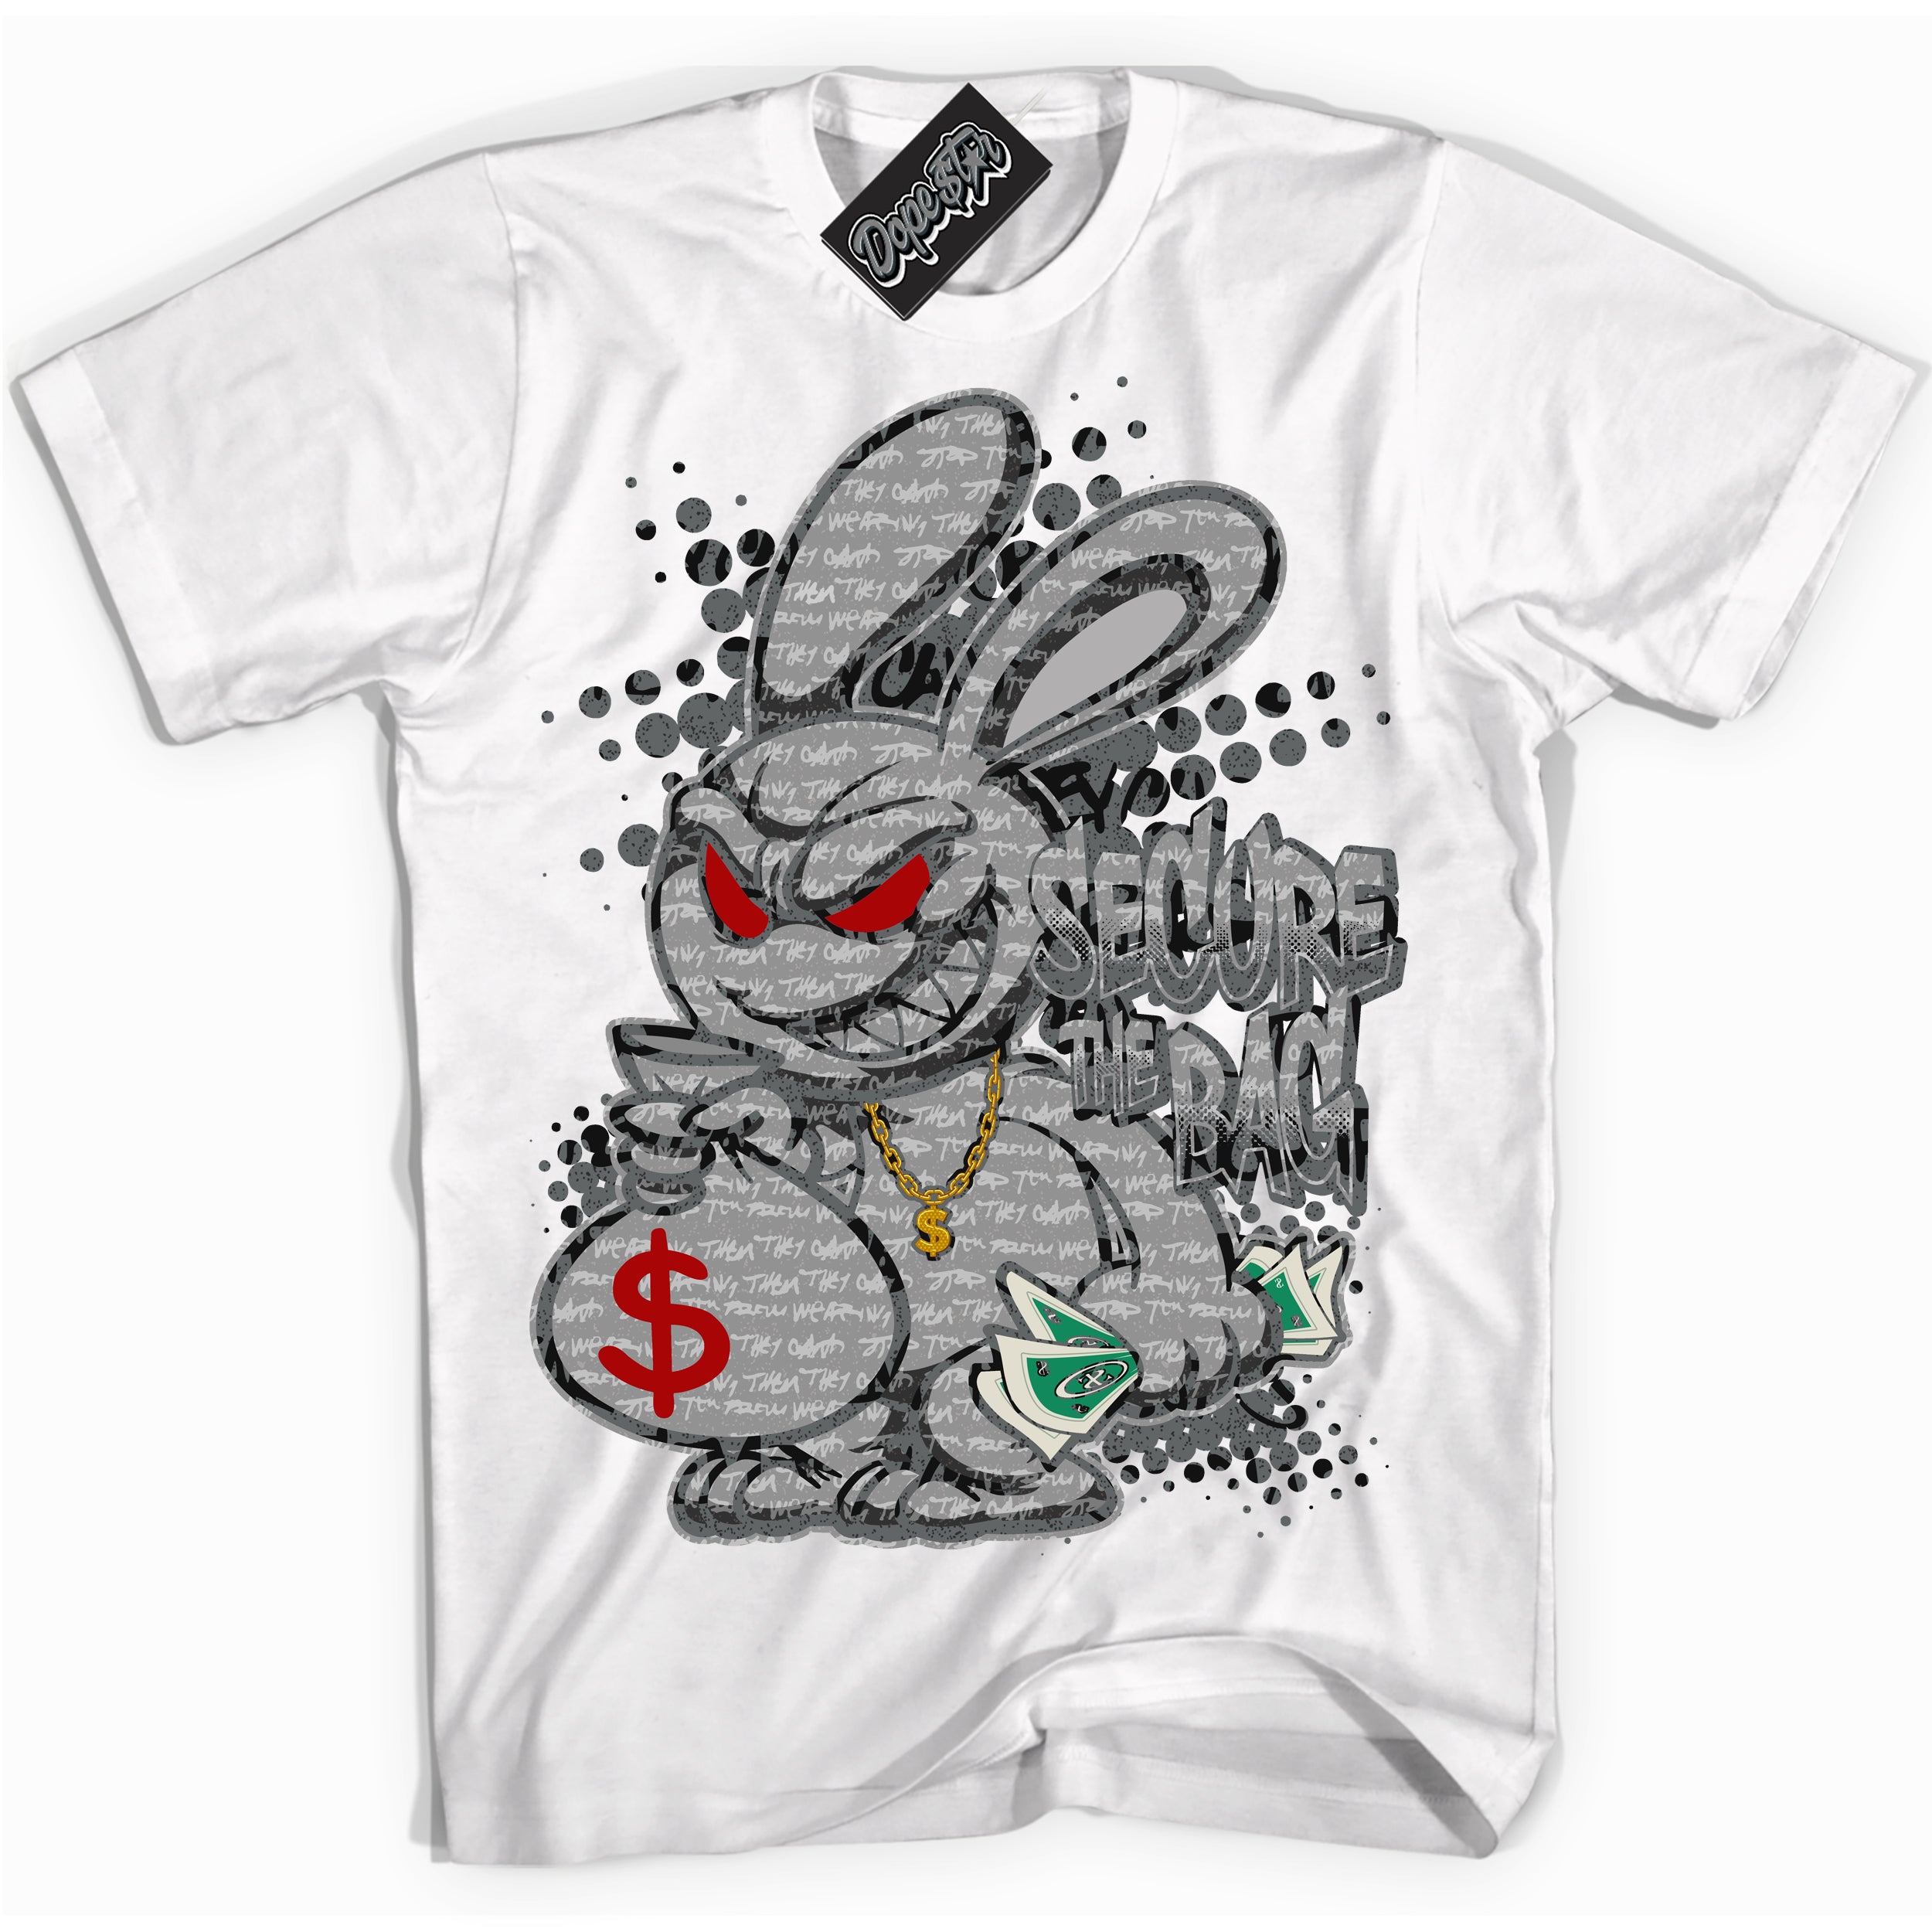 Cool White Shirt with “ Secure The Bag ” design that perfectly matches Rebellionaire 1s Sneakers.